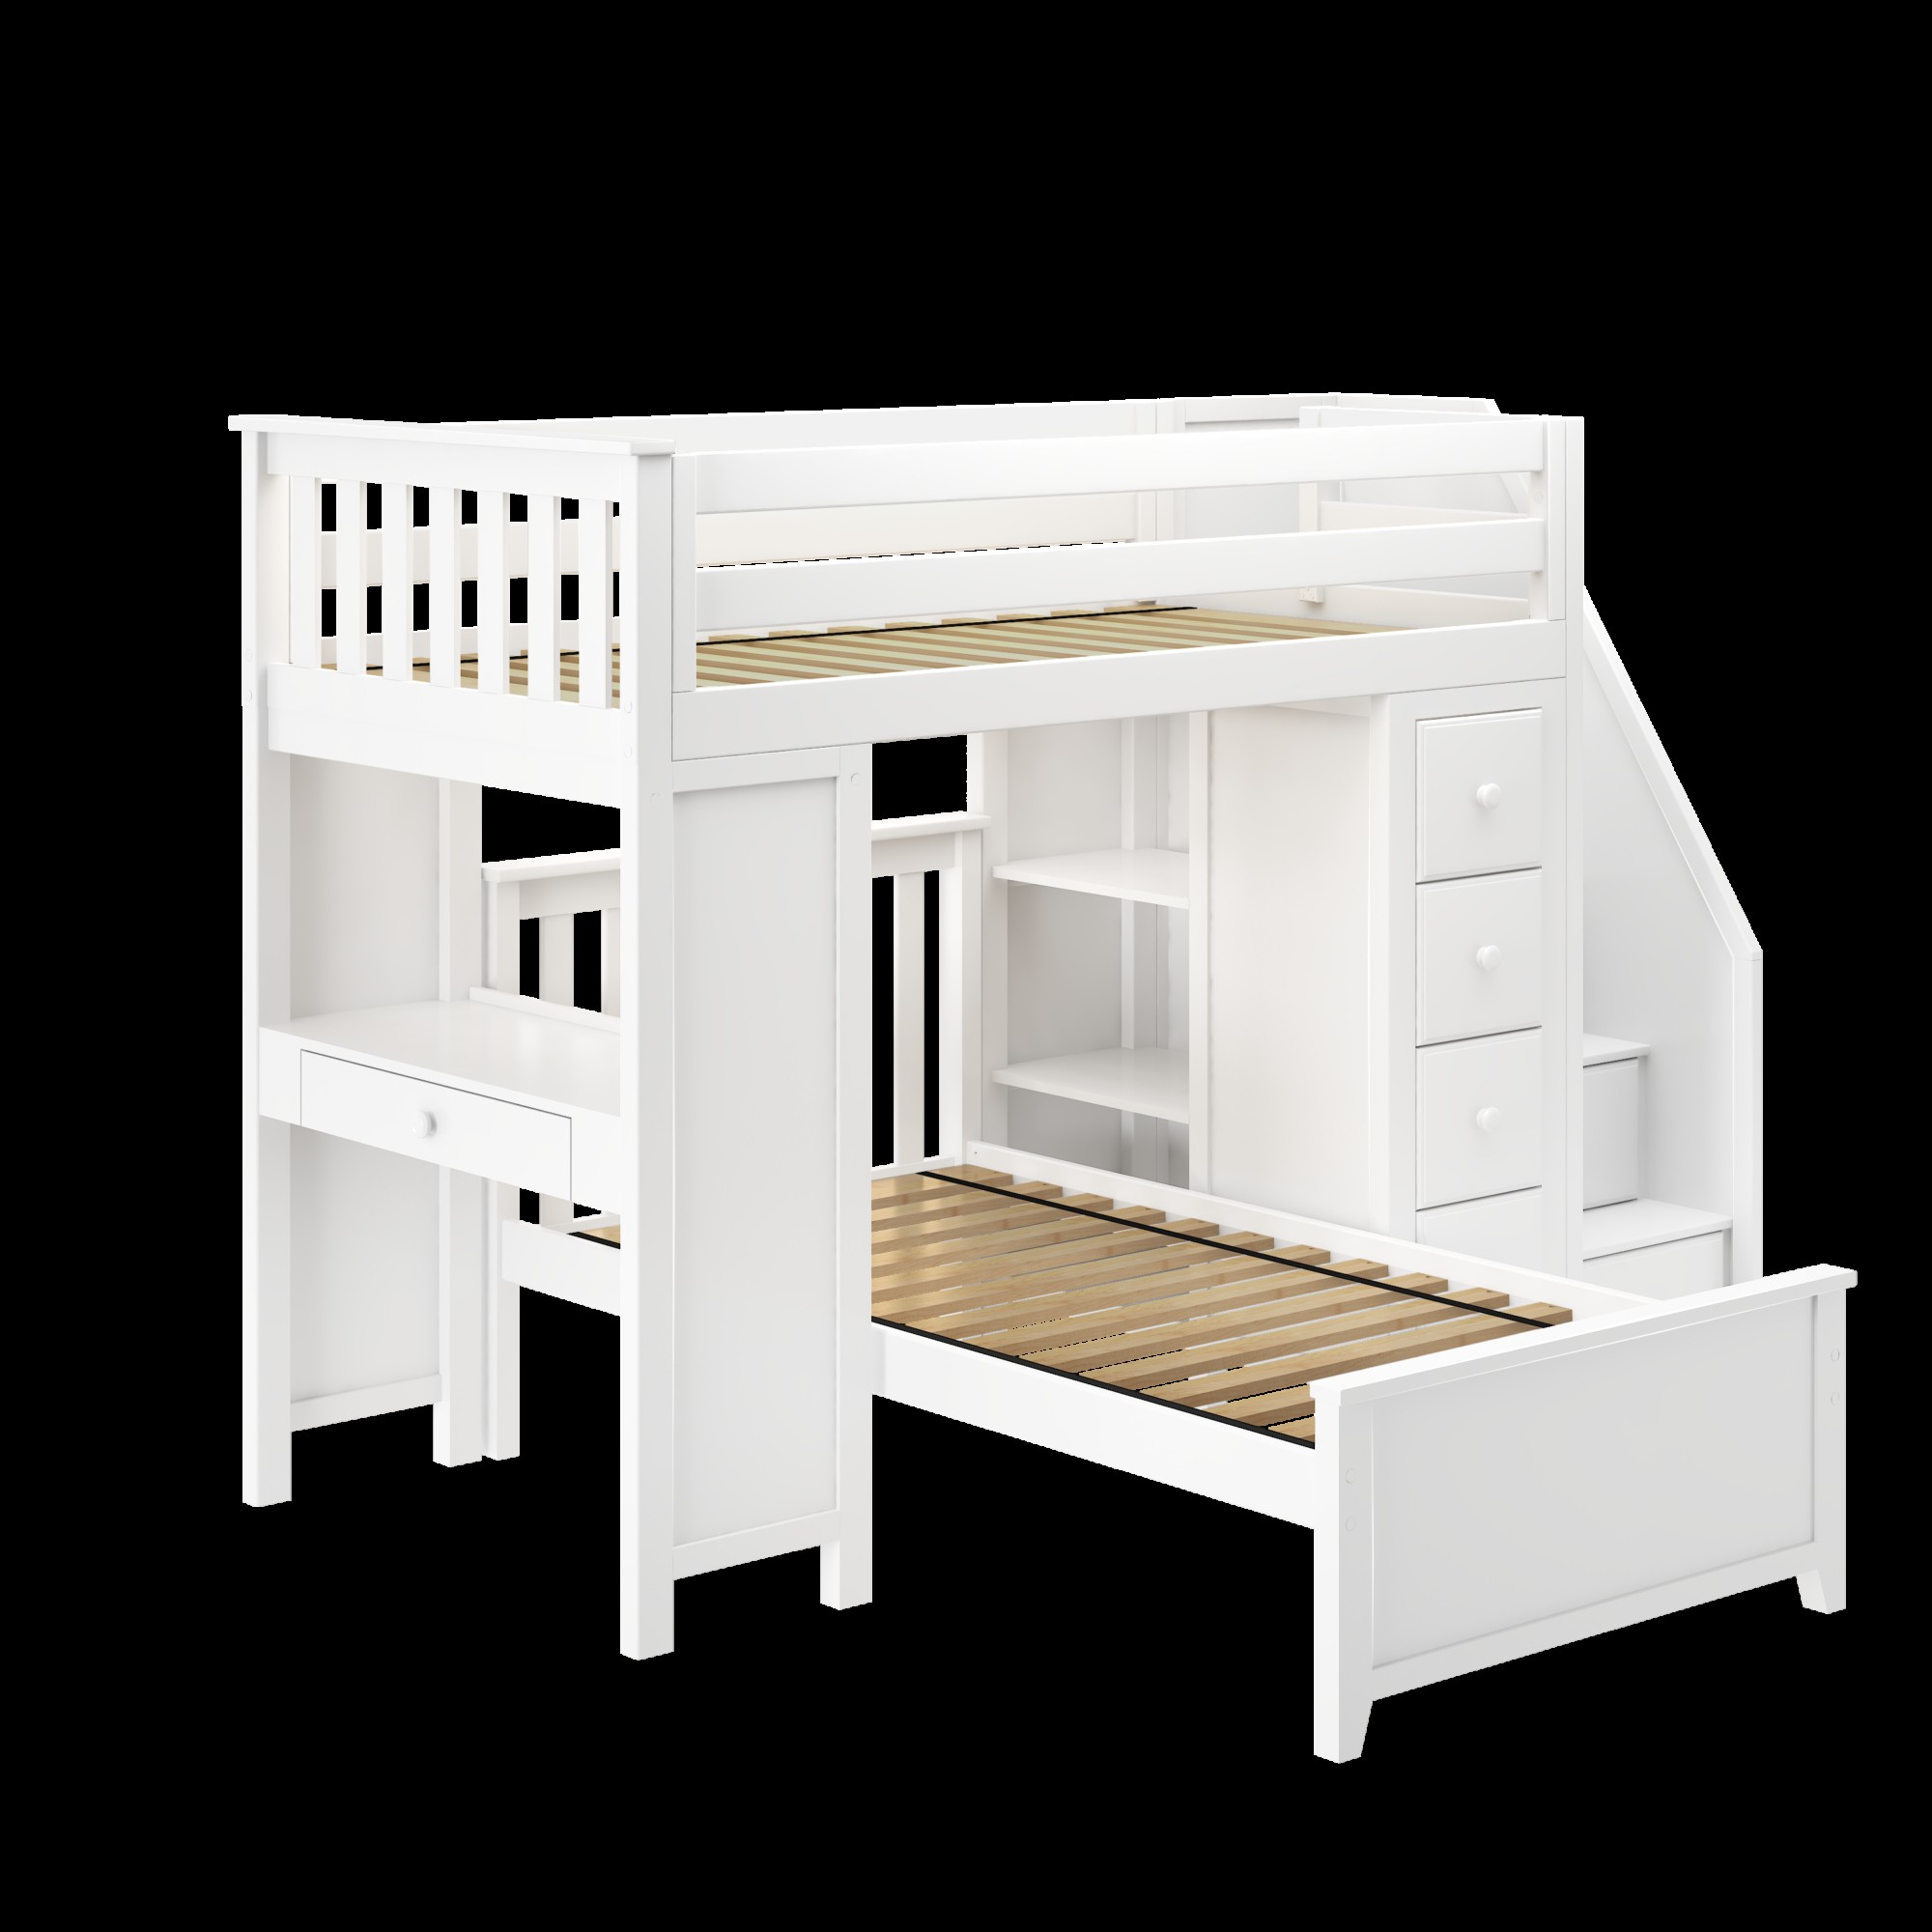 All in one staircase storage study twin loft bed twin